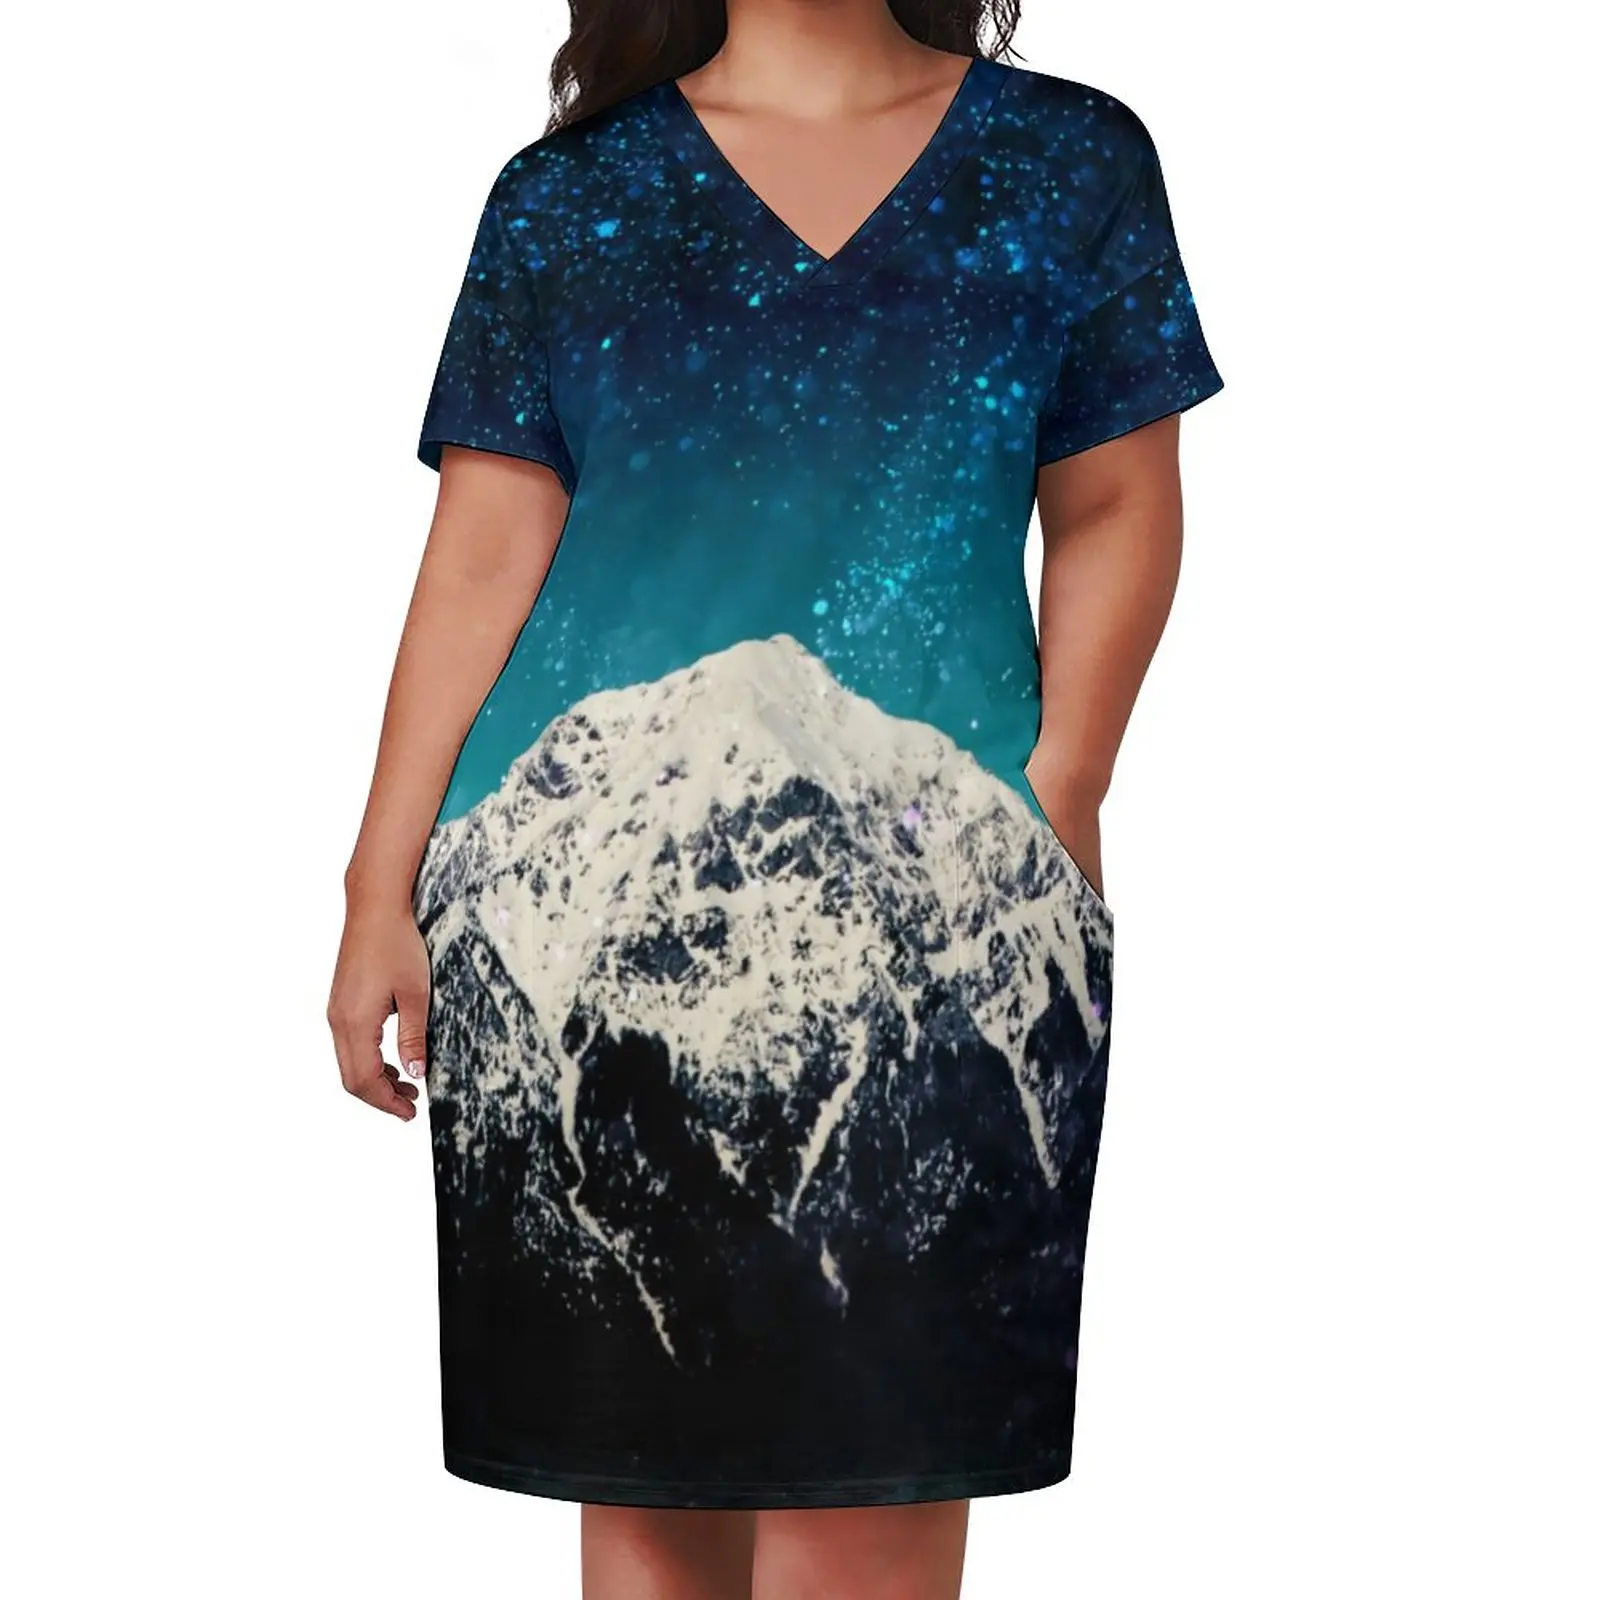 

Dreamy Starry Casual Dress Summer Galaxy Mountain Pretty Dresses Female Short Sleeve Pattern Aesthetic Dress Large Size